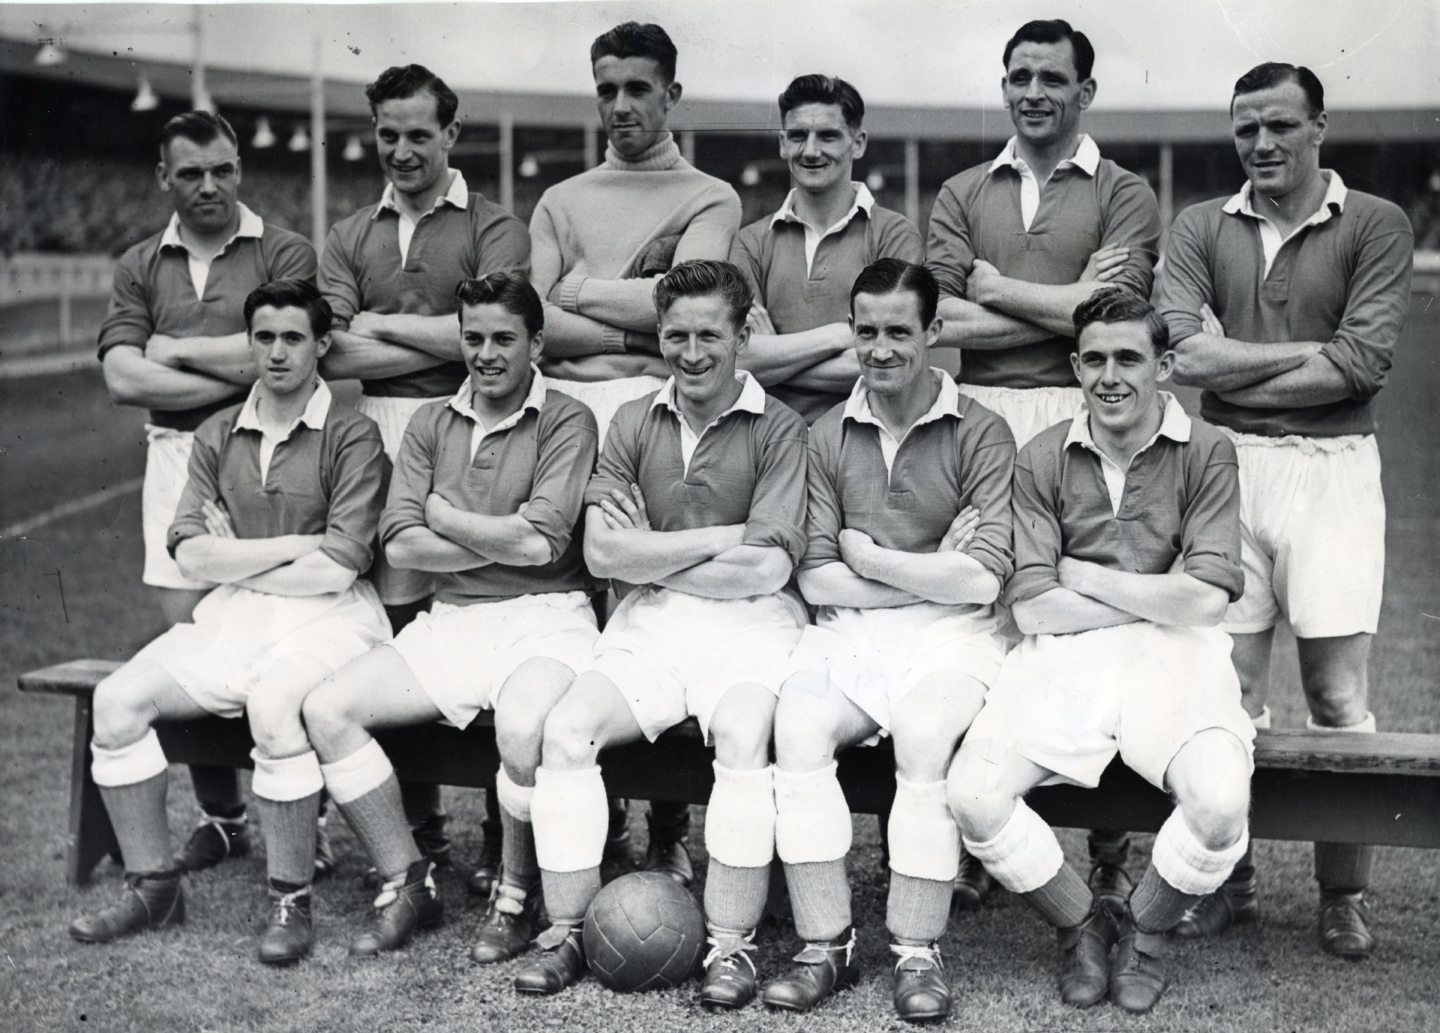 Aberdeen FC pictured in 1951. Back row, from left: Don Emery, Chris Anderson, Fred Martin, Alec Young, Archie Baird and Tony Harris. Front row, from left: Alan Boyd, Harry Yorston, Davie Shaw, George Hamilton and Jack Hather.